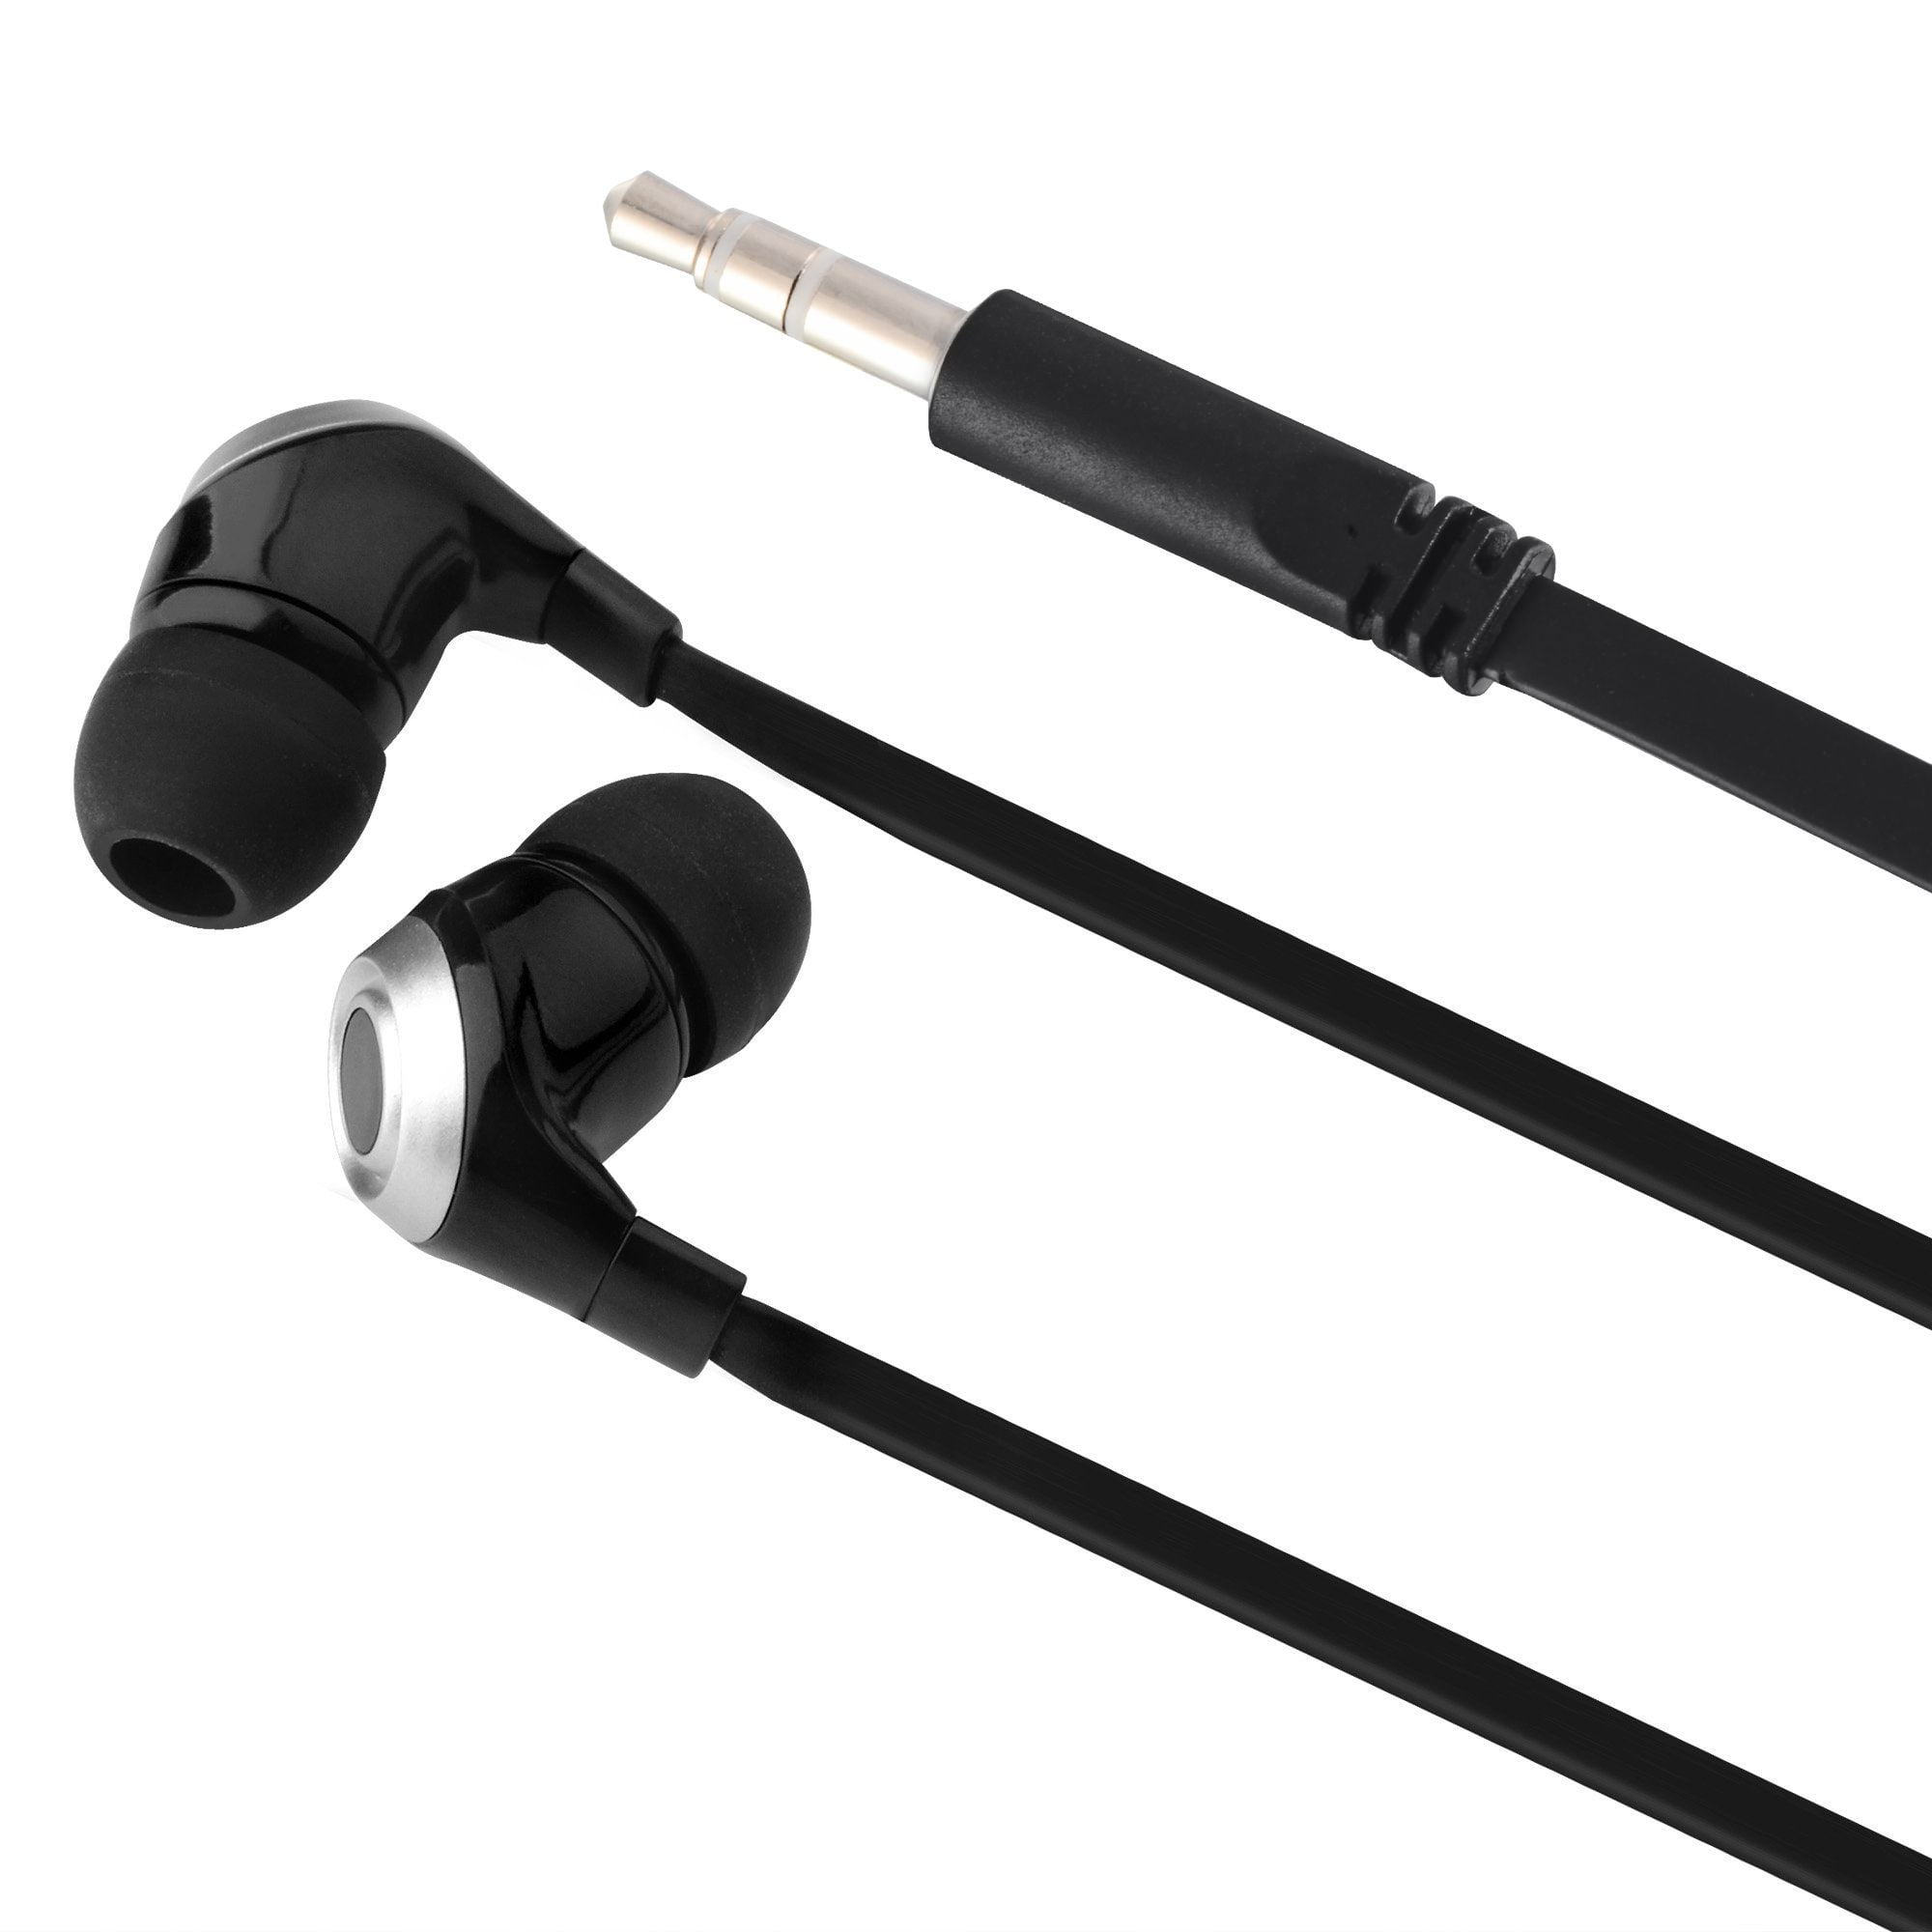 Earphones/Earbuds w/Mic&Remote Stereo Earphones Noise Isolating Headphone Compatible with iPhone 5/6/6S/SE/4 iPod iPad Samsung/Android MP3/MP4 